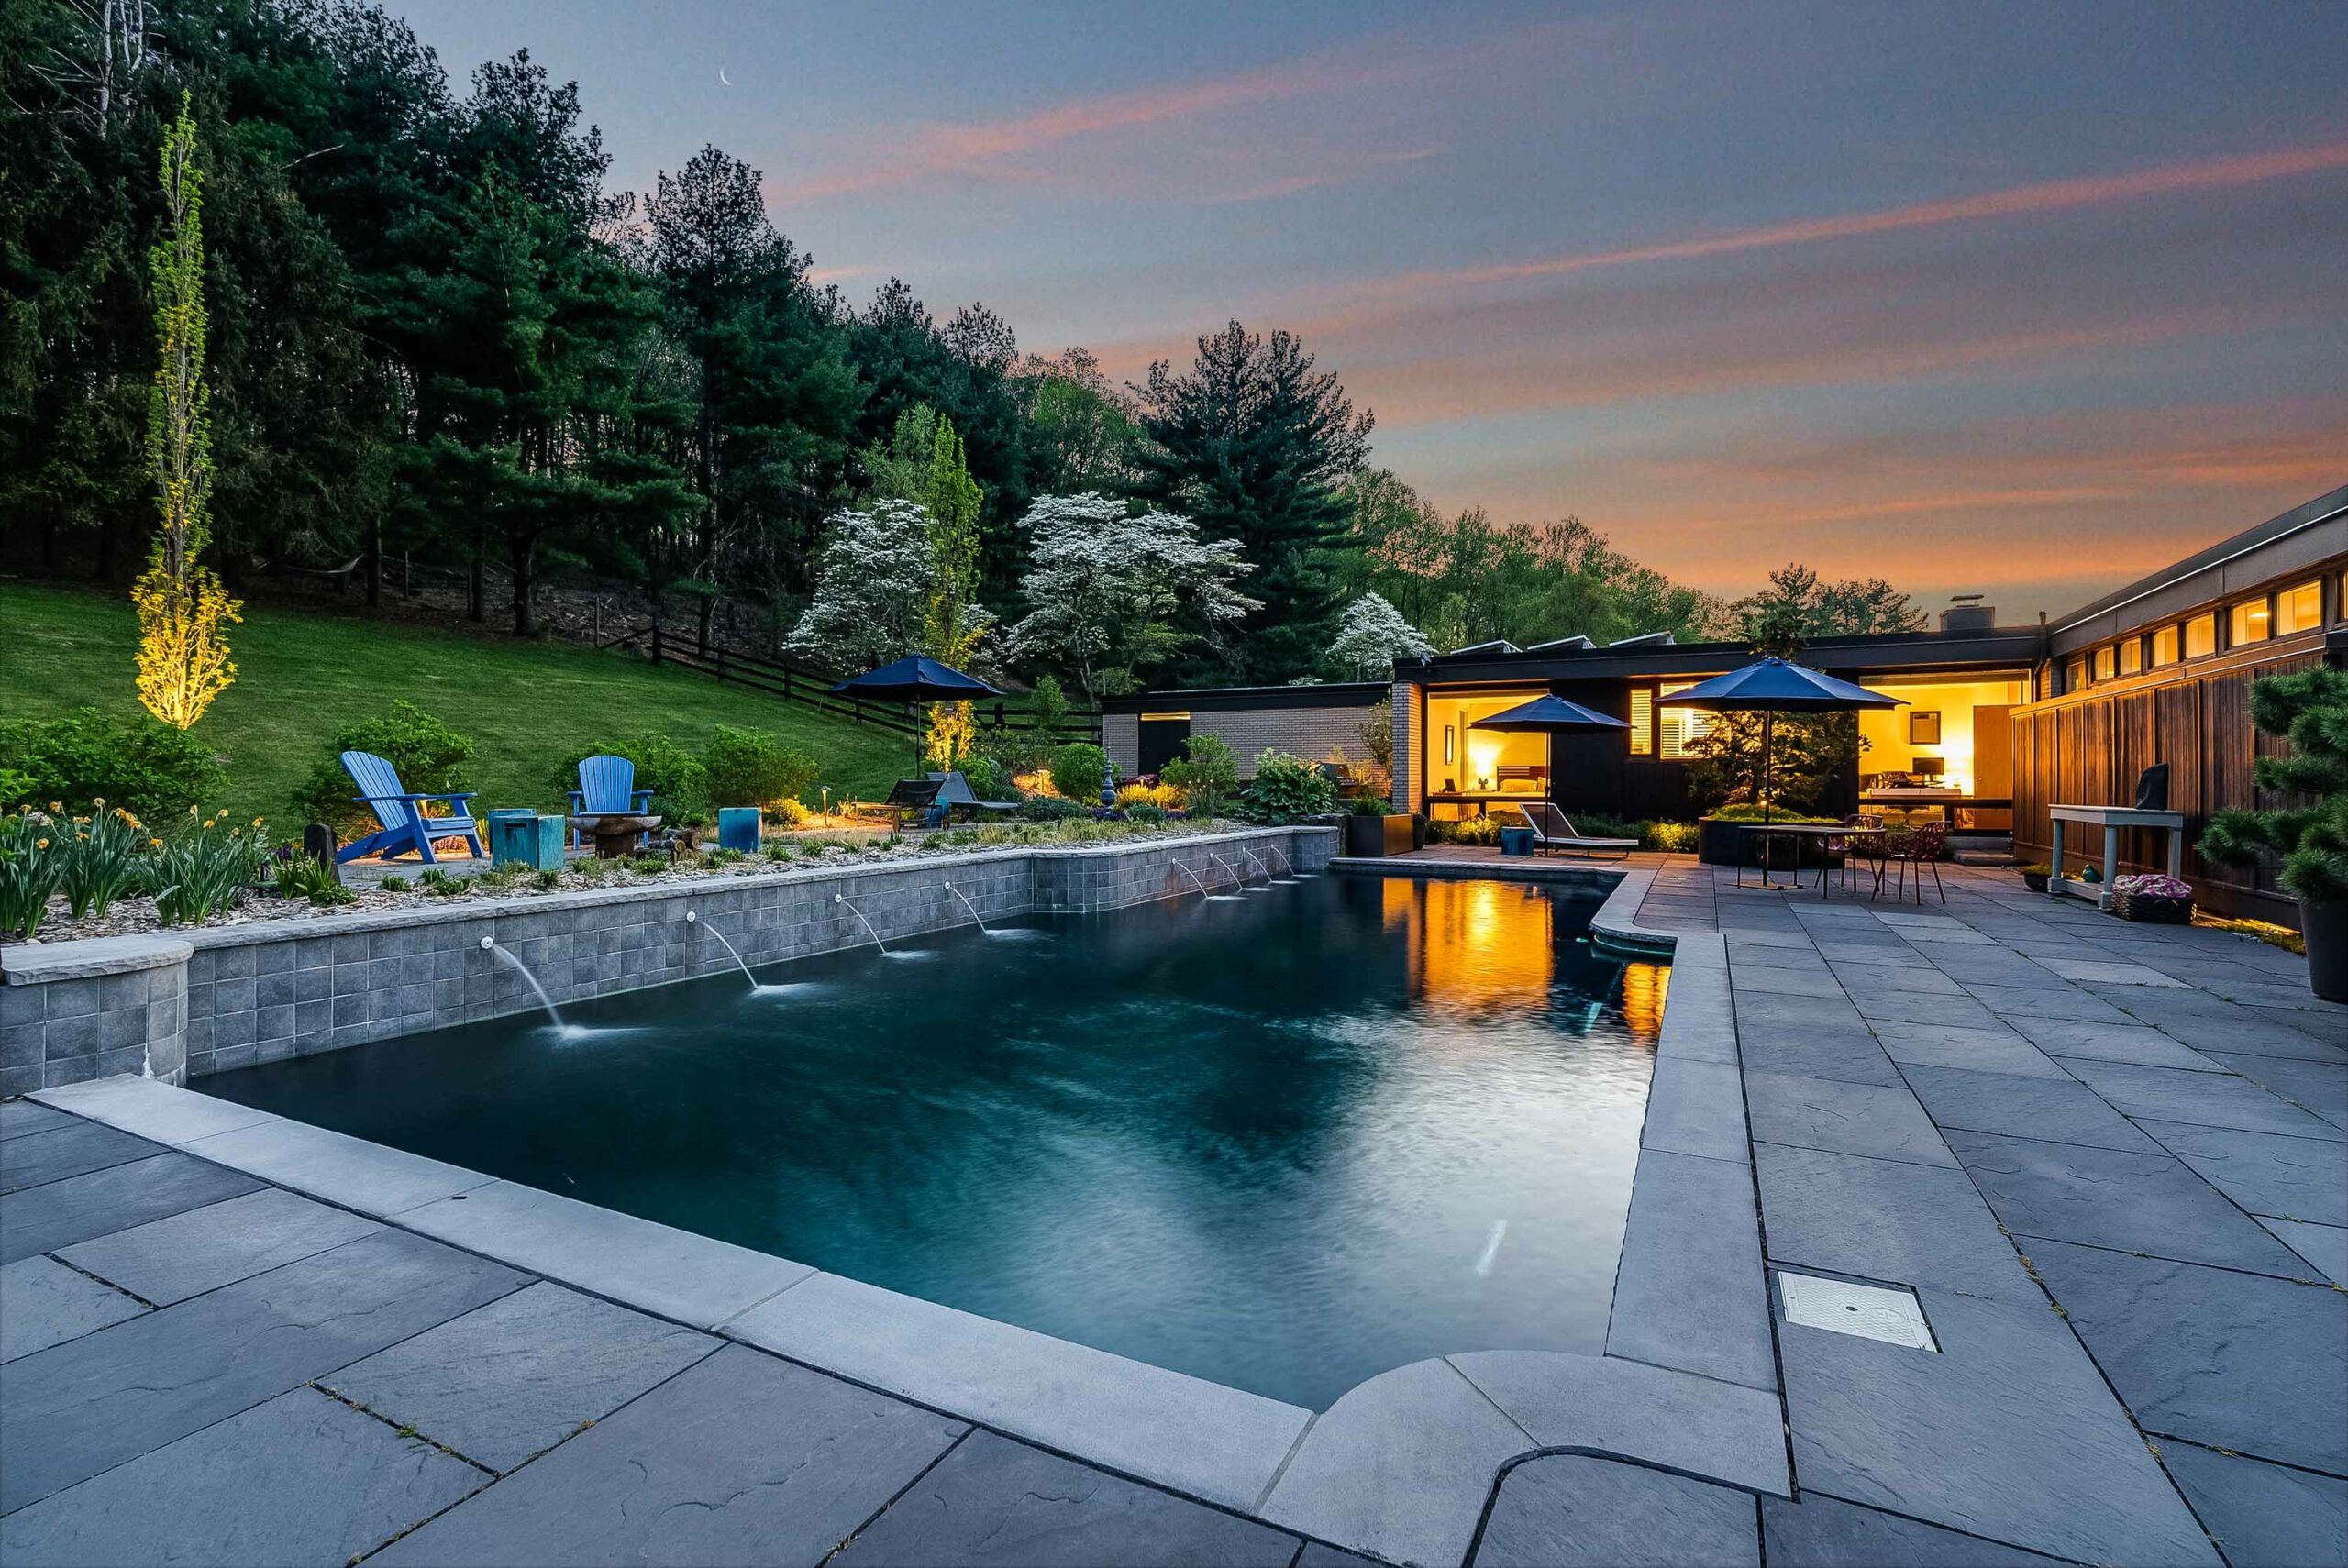 10 Spring Hill Road, Franklin Twp., NJ Poolscape